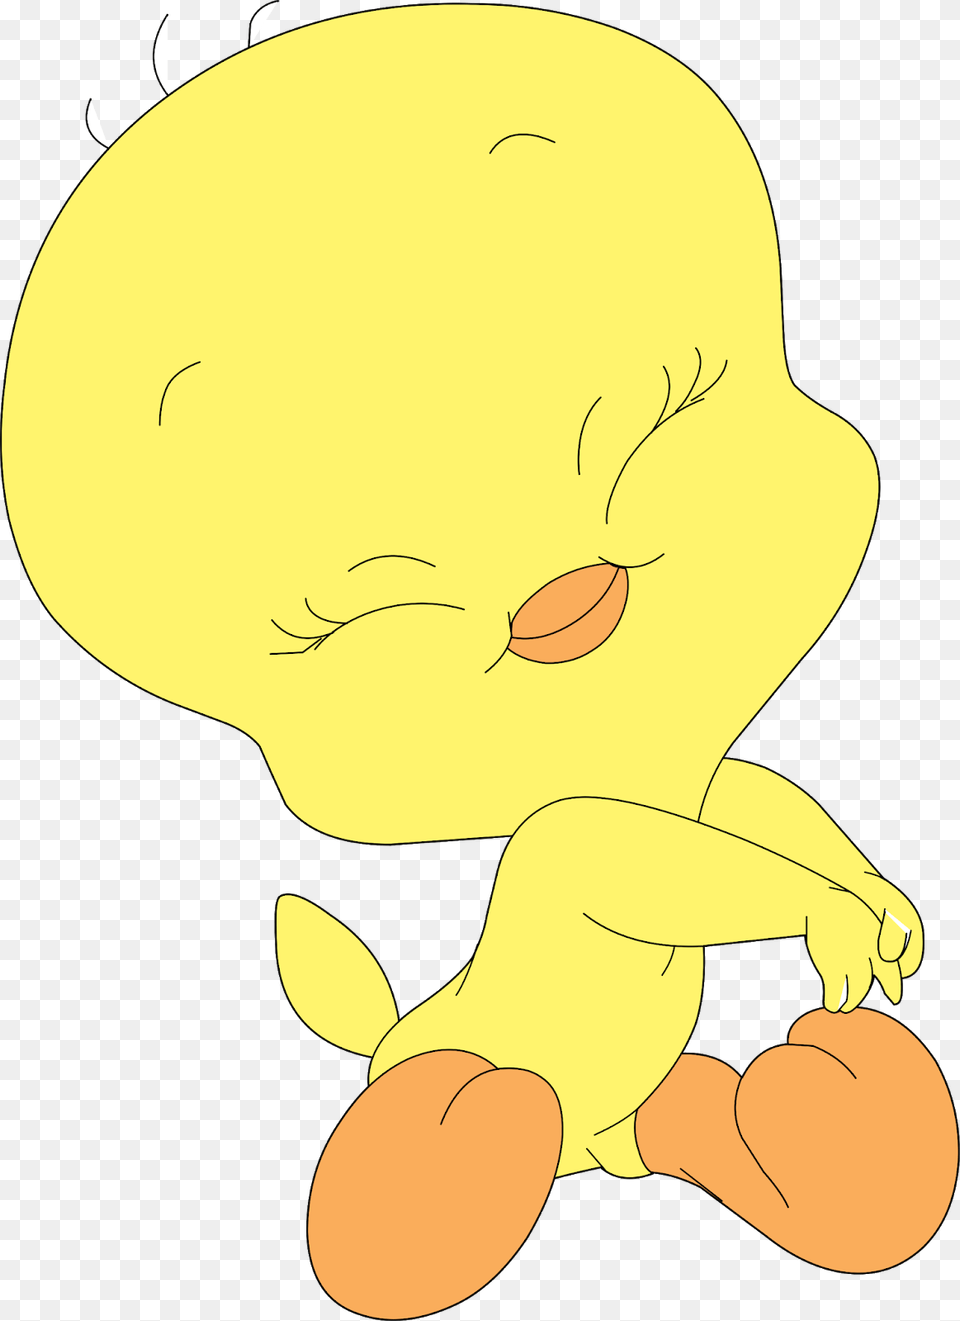 Baby Looney Tunes Characters Baby Looney Tunes Cartoon Looney Tunes Baby Tweety, Person Free Transparent Png